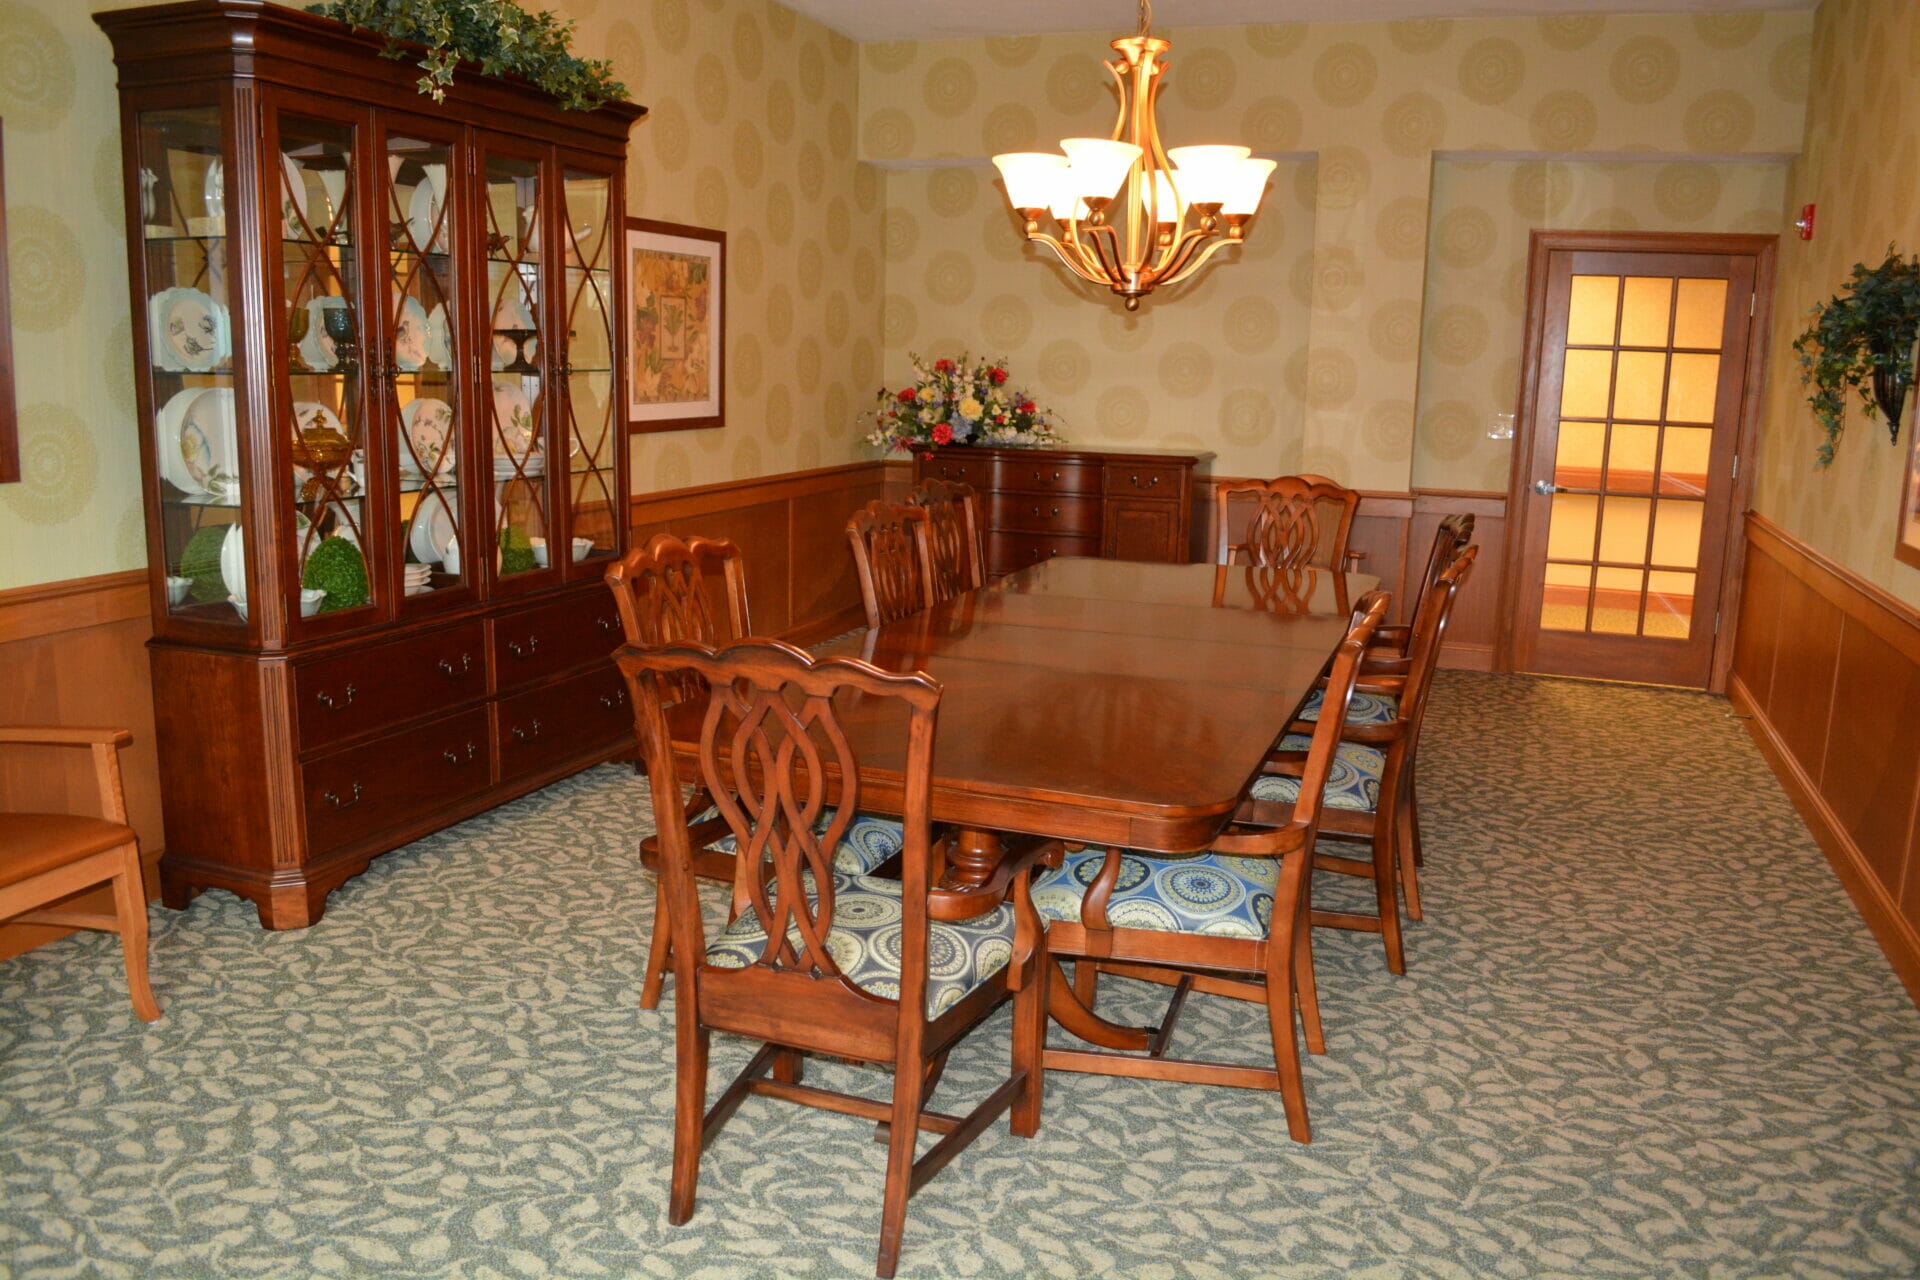 <span  class="uc_style_uc_tiles_grid_image_elementor_uc_items_attribute_title" style="color:#000000;">The private dining room at Allisonville Meadows Assisted Living building. </span>